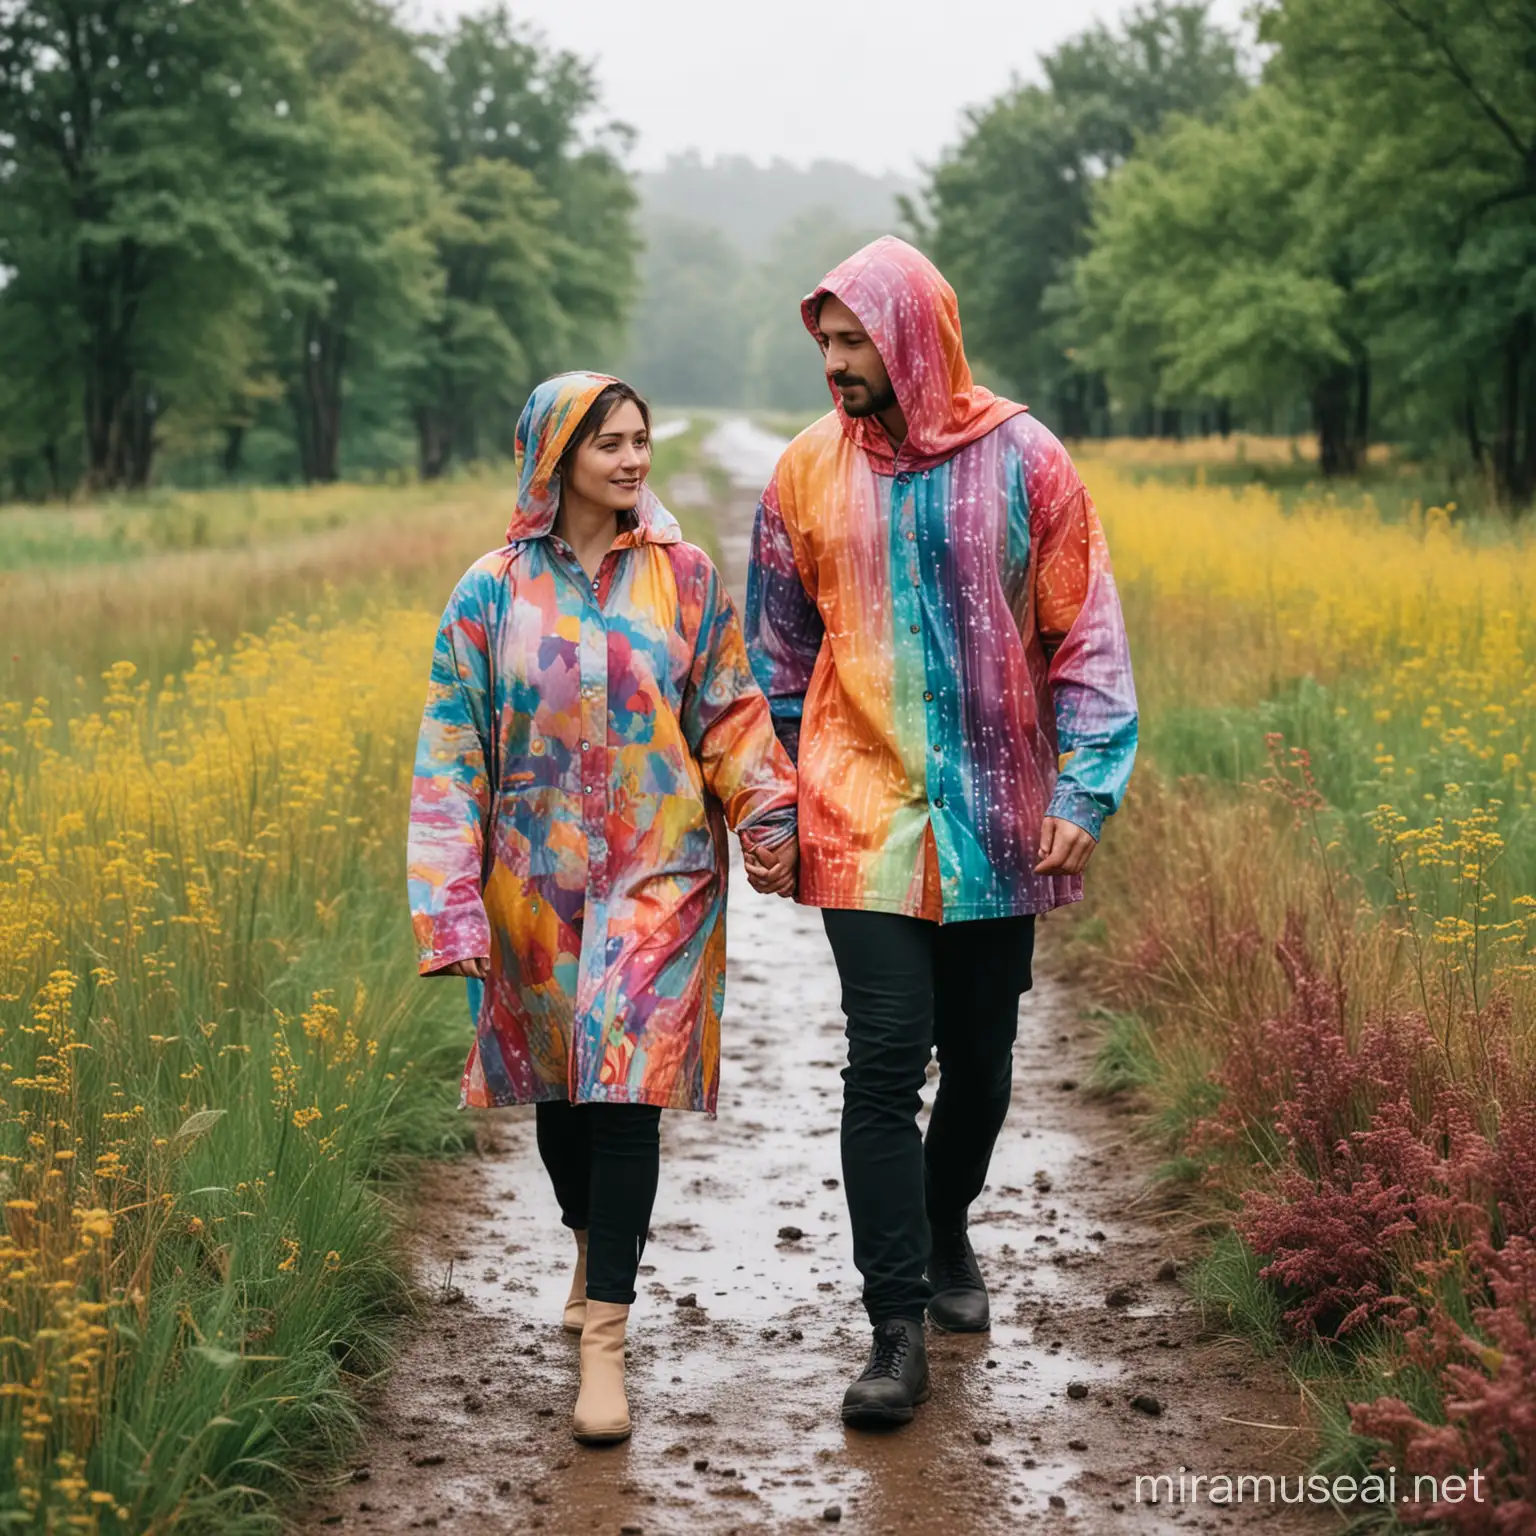 Tranquil Couple Strolling Amidst Vibrant Nature